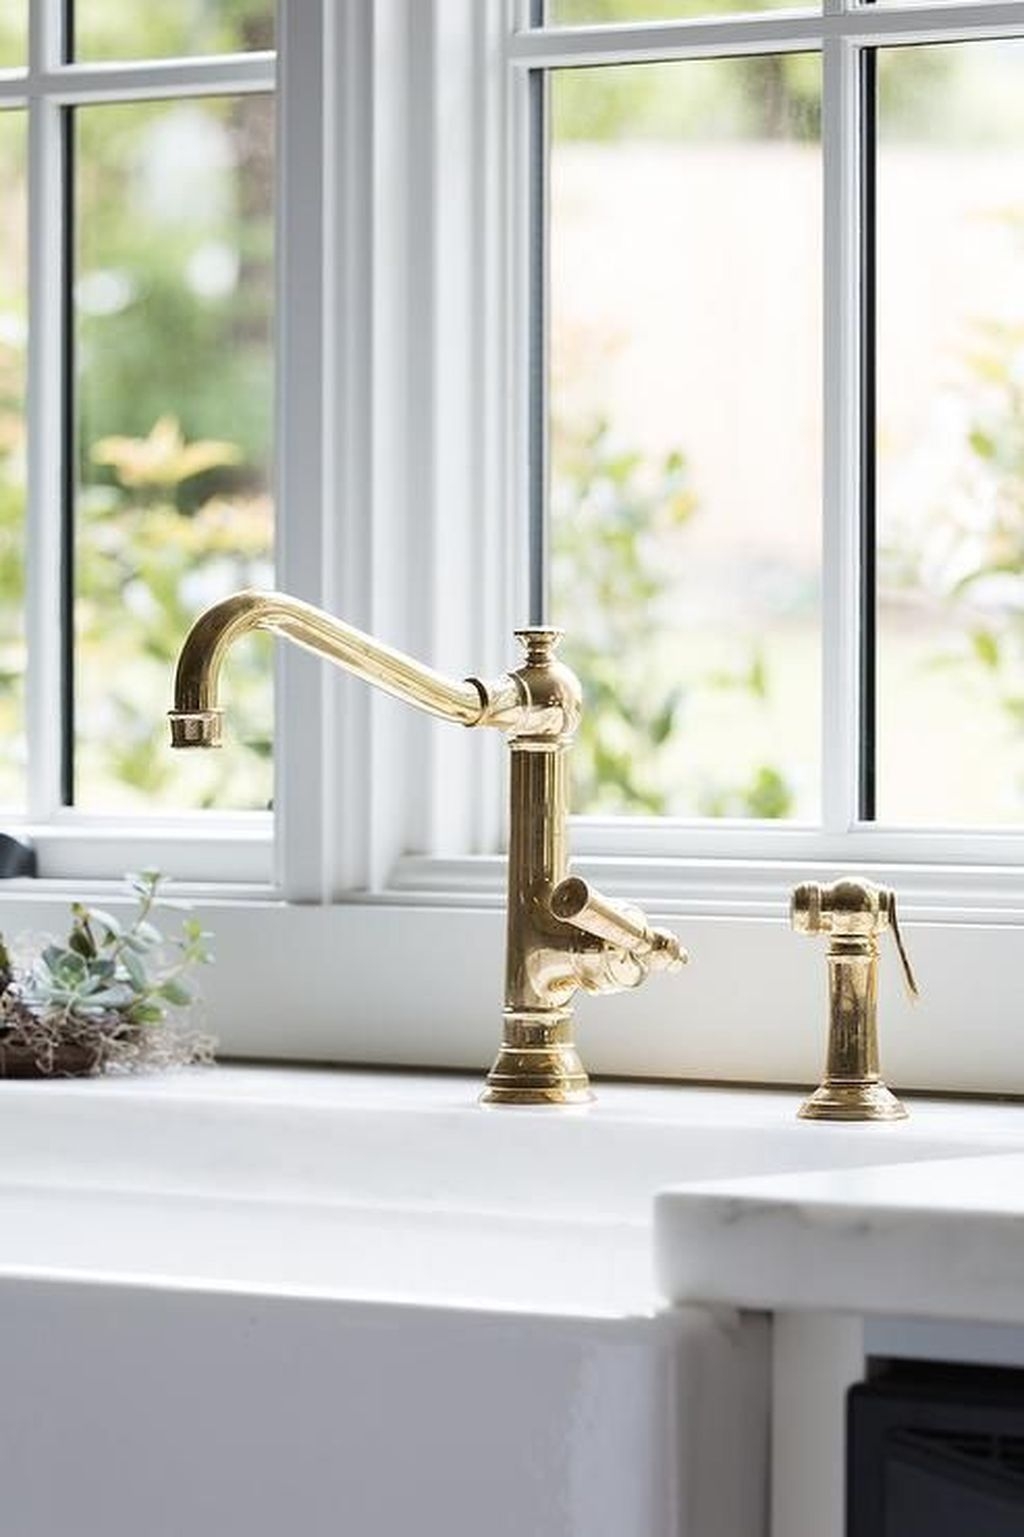 Antique Brass Kitchen Faucet You Ll Love In 2021 Visualhunt